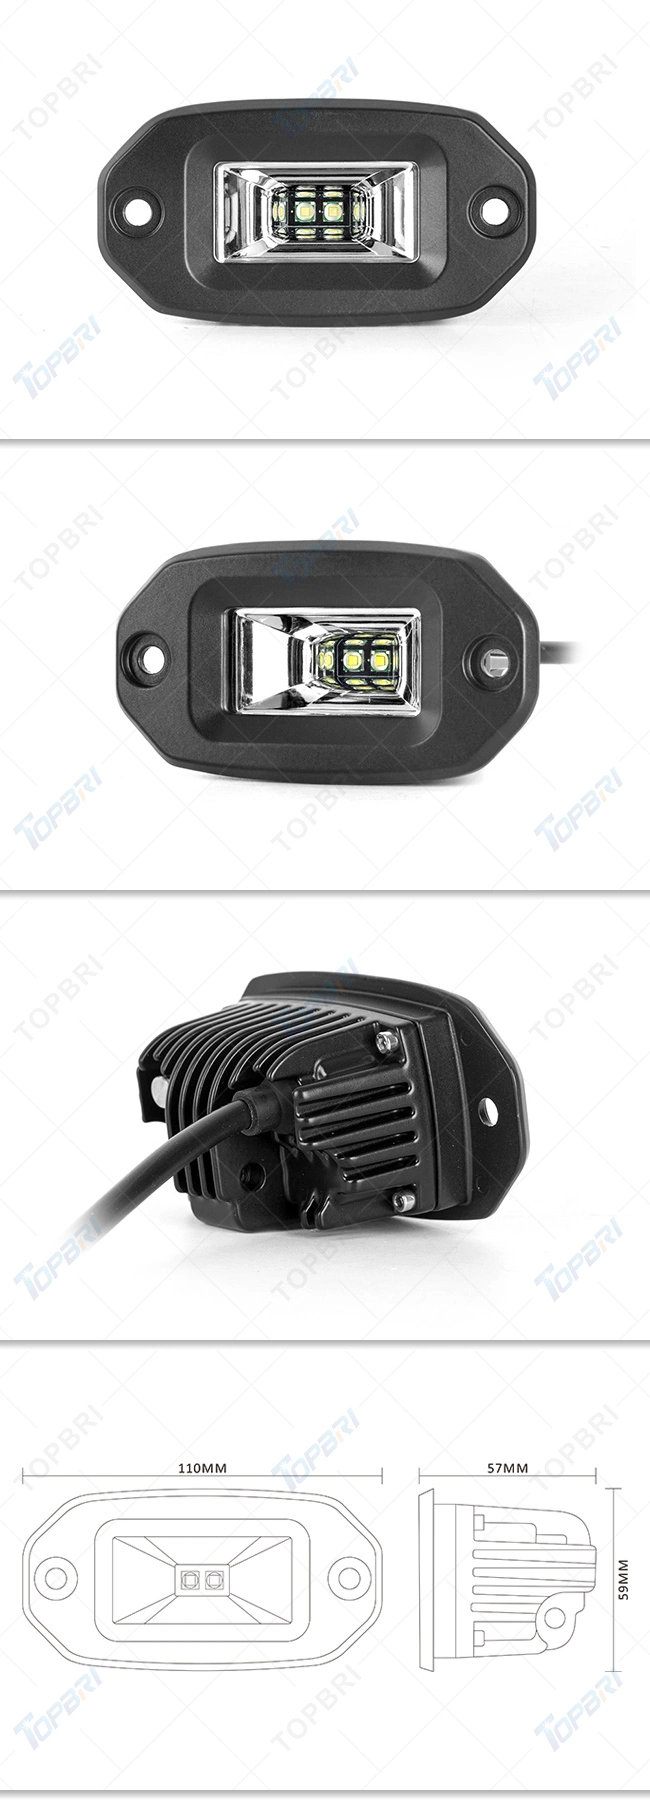 CREE Auto Motorcycle 20W Head LED Work Light with Flush Mount